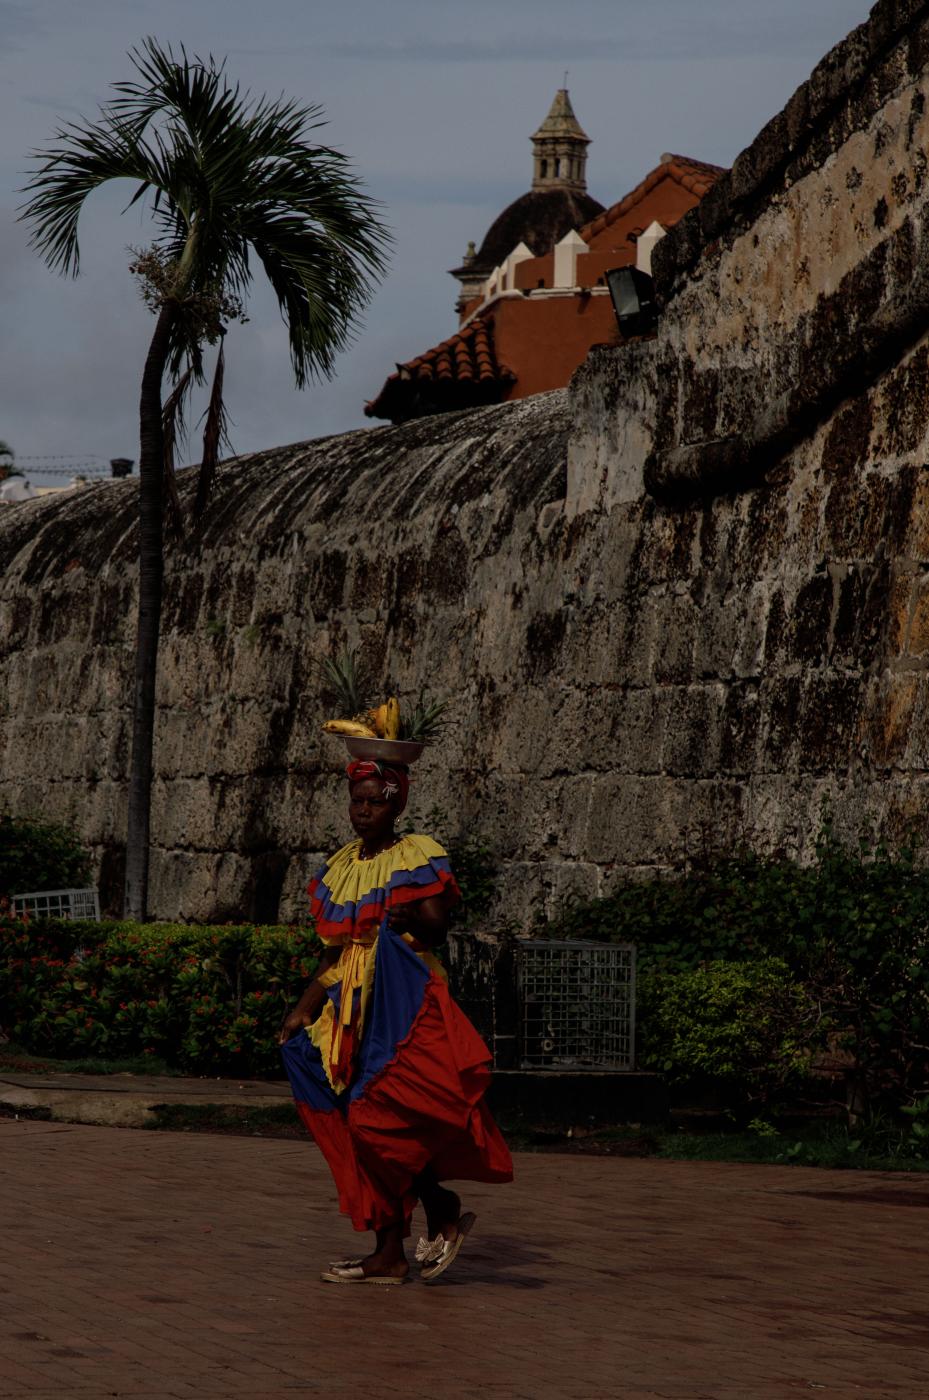 Palenquera | Buy this image